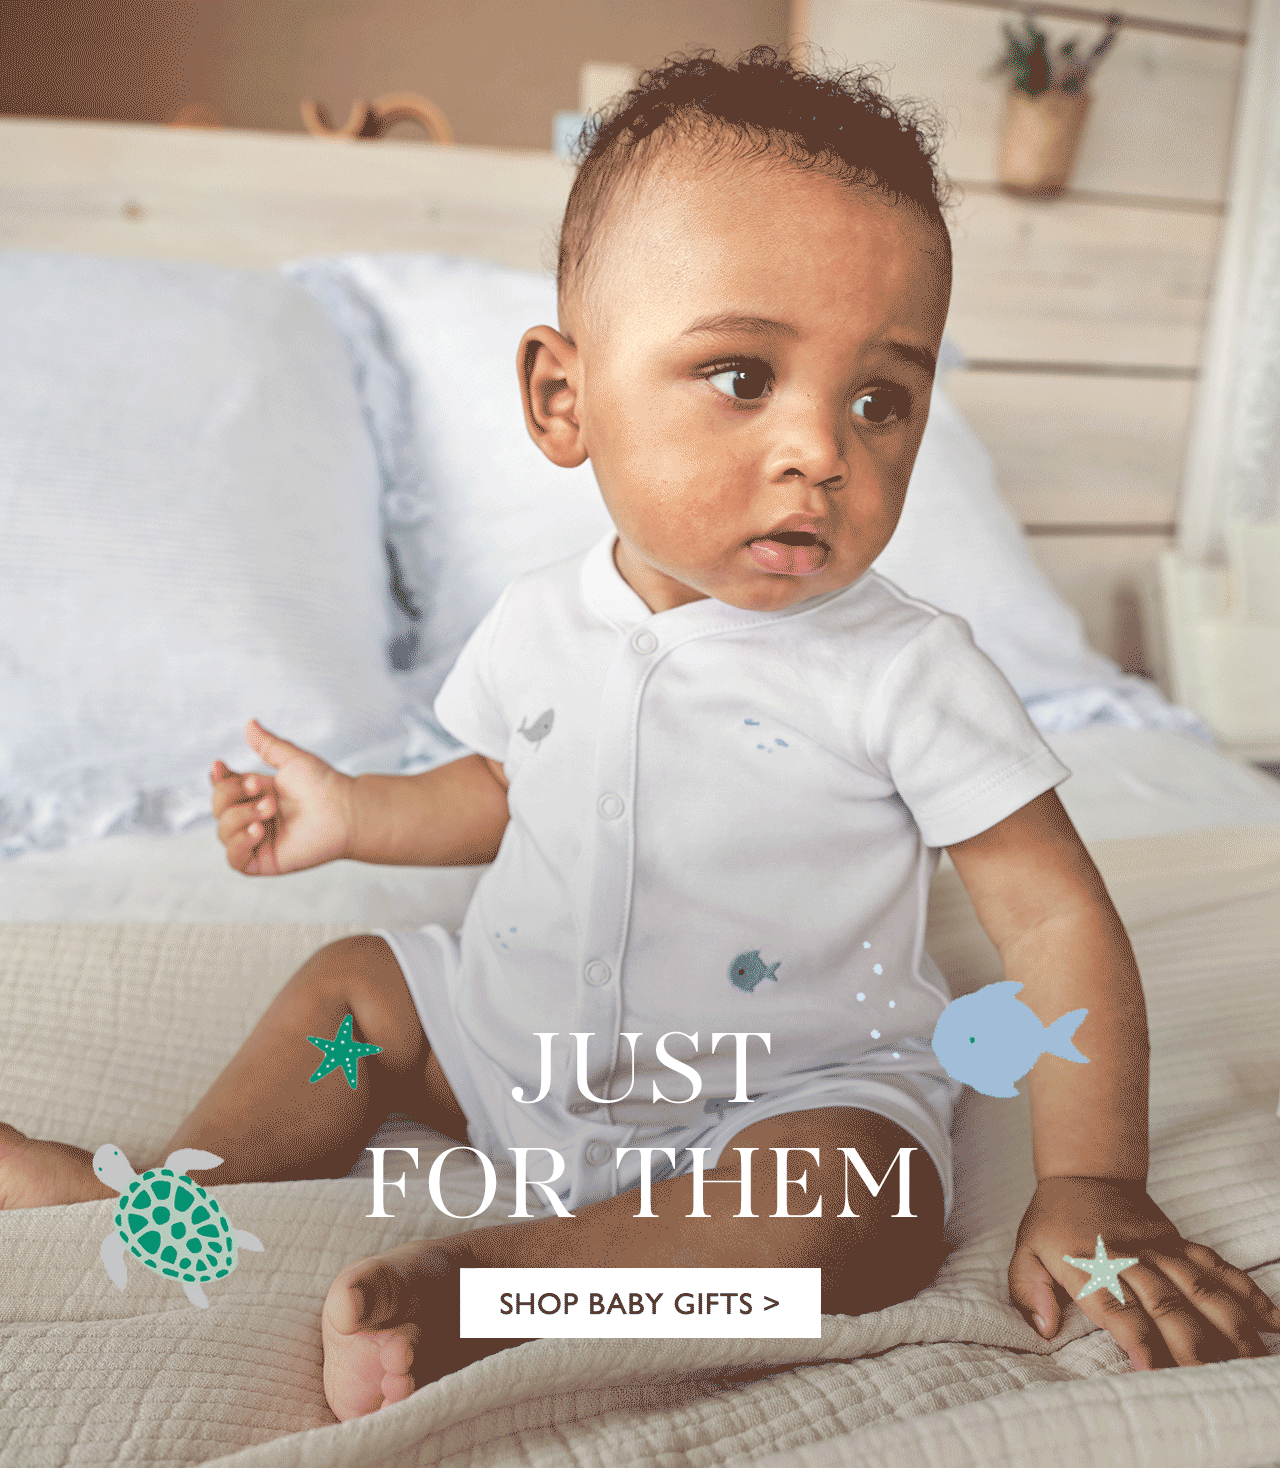 JUST FOR THEM | SHOP BABY GIFTS